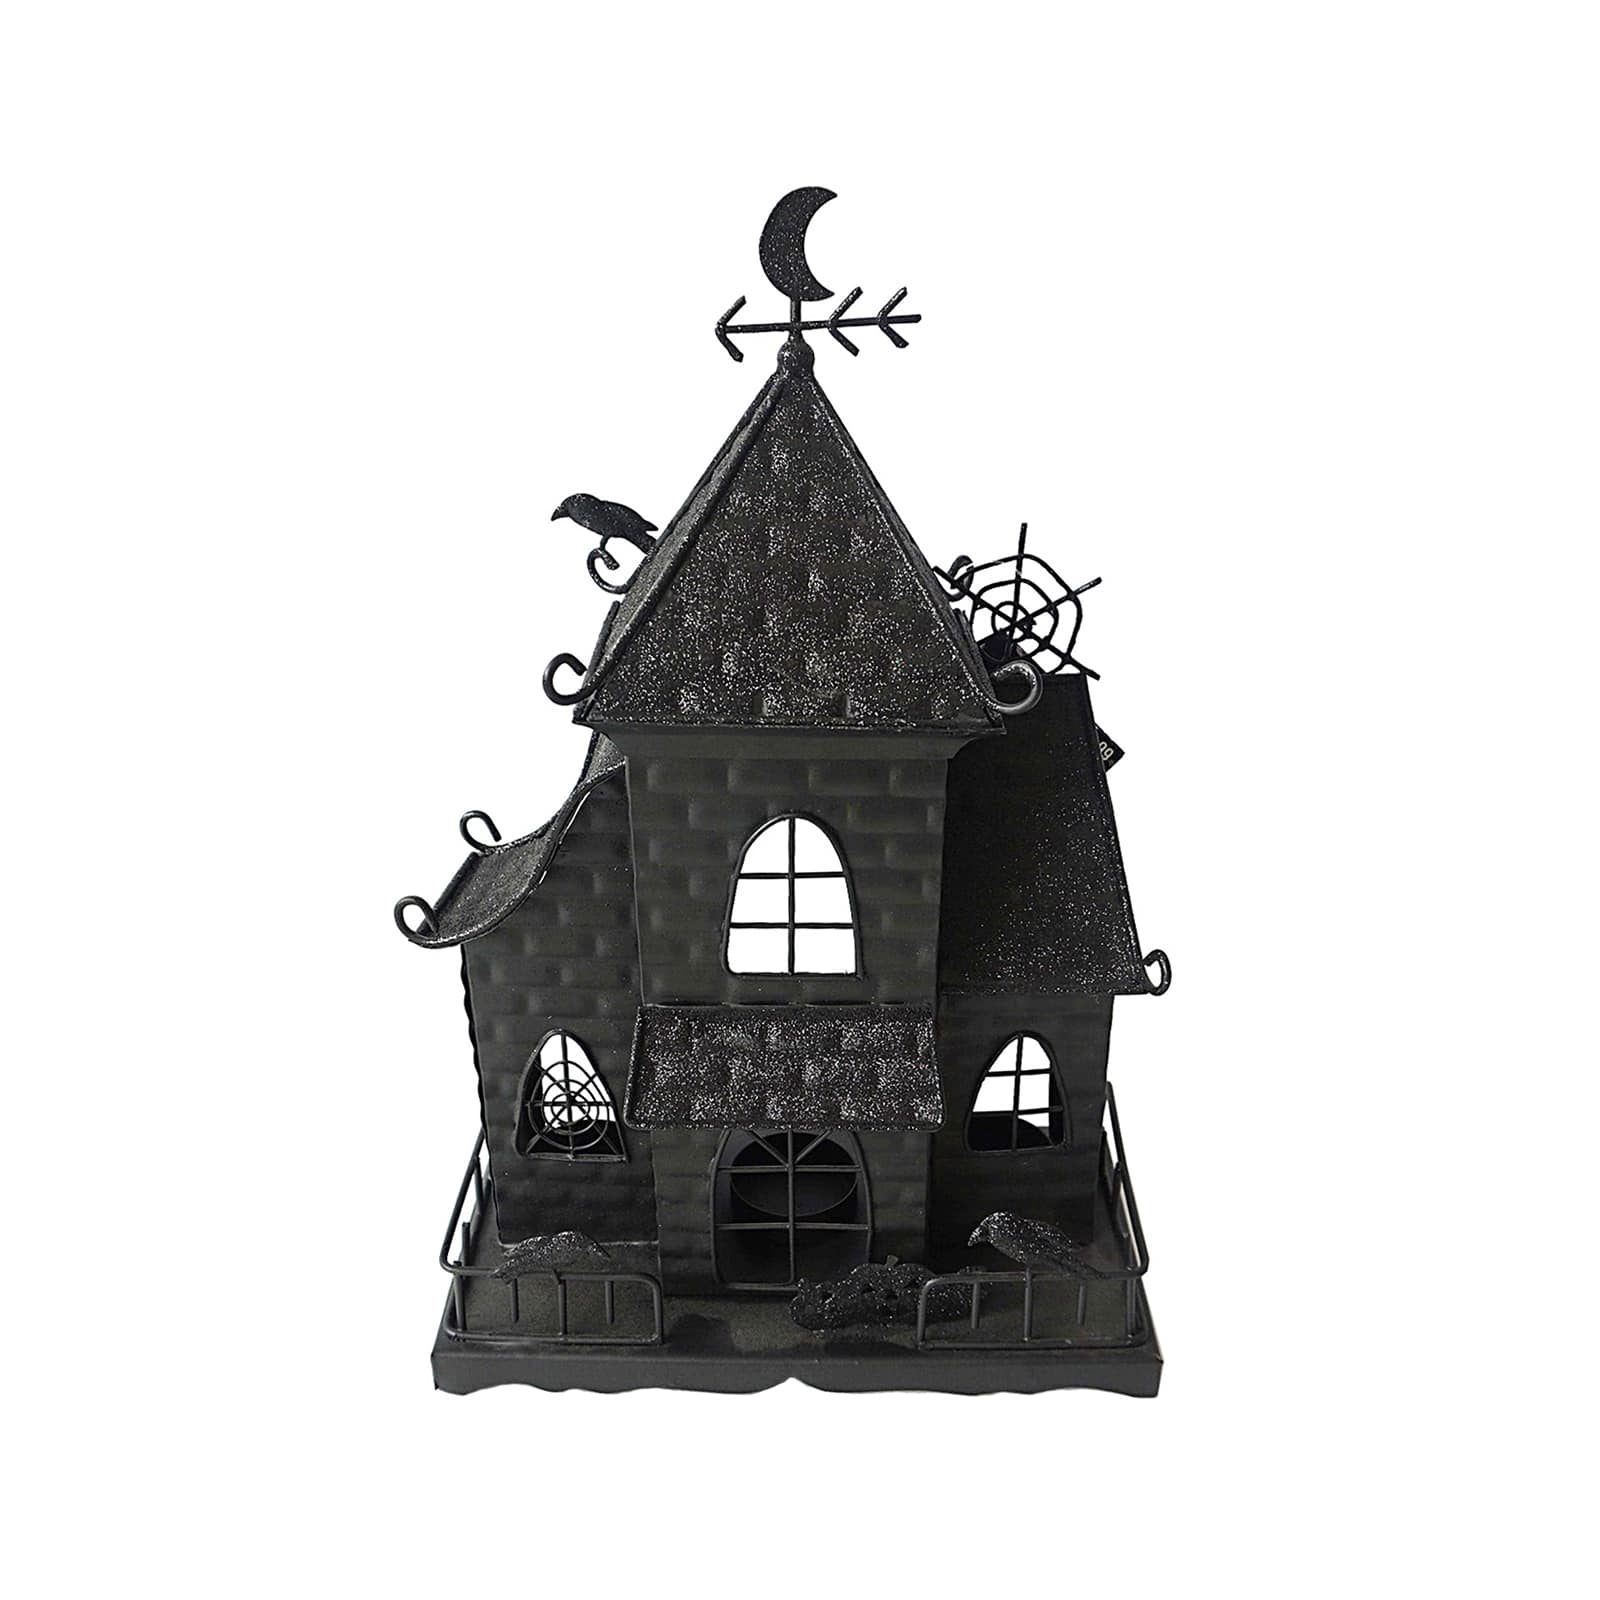 5 Stores to Buy the Best Halloween Decorations - Nerd∙ily